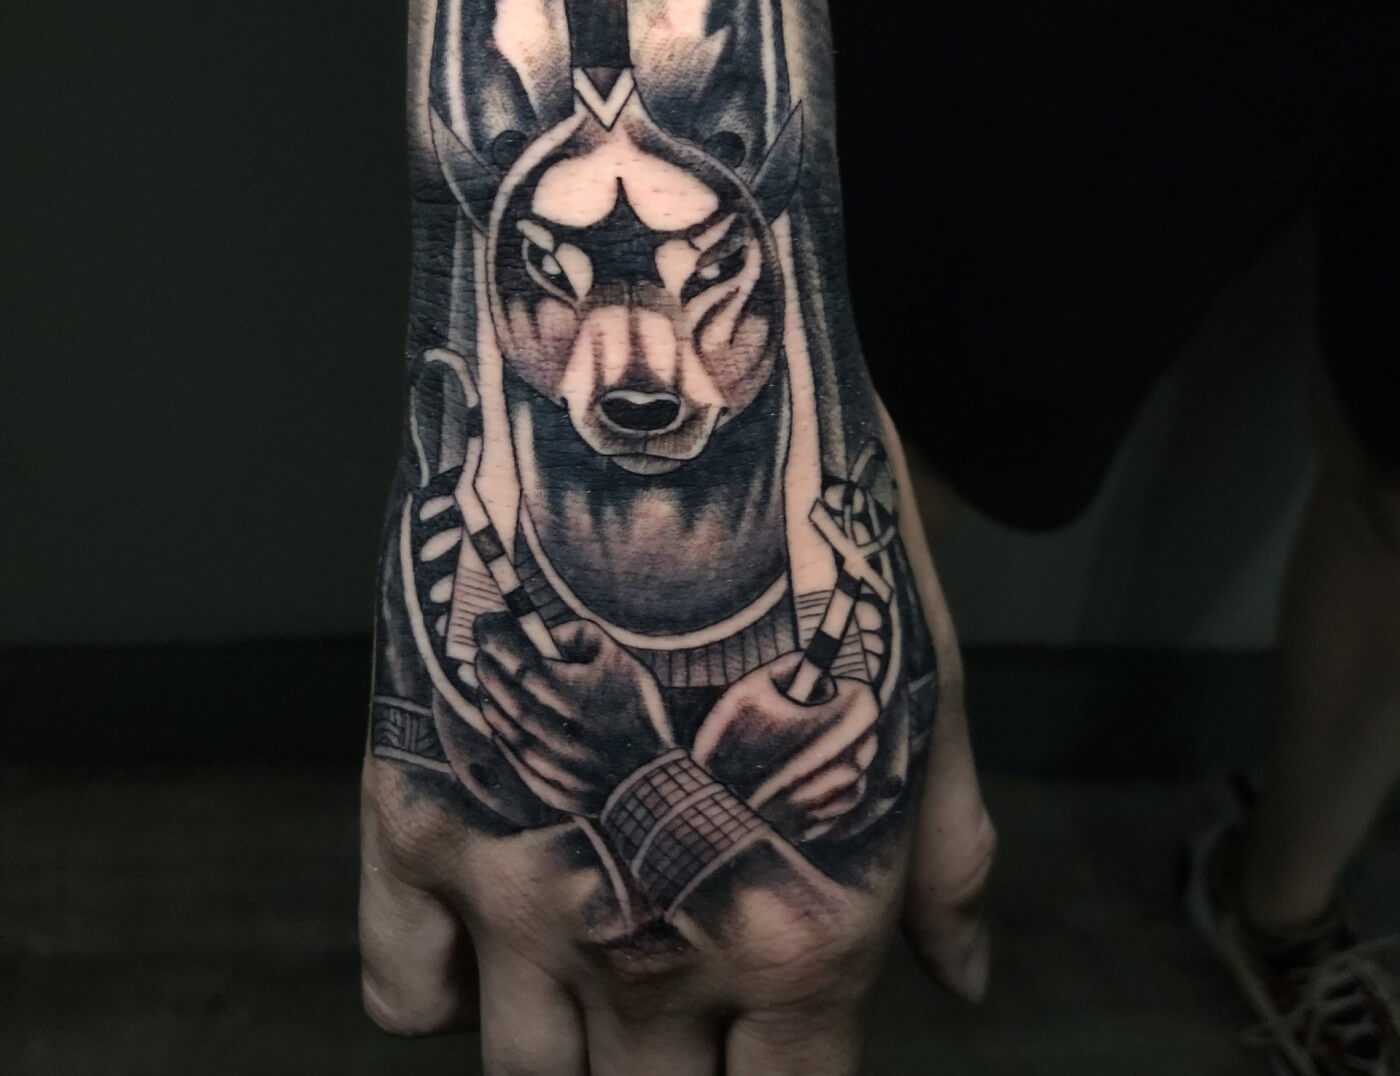 Anubis is an Egyptian God of the Dead,. This black & grey portrait tattoo was created by J.R. Outlaw of Iron Palm Tattoos & Body Piercing. We're open late night for tattoos. Call 404-973-7828 or stop by for a free consultation.